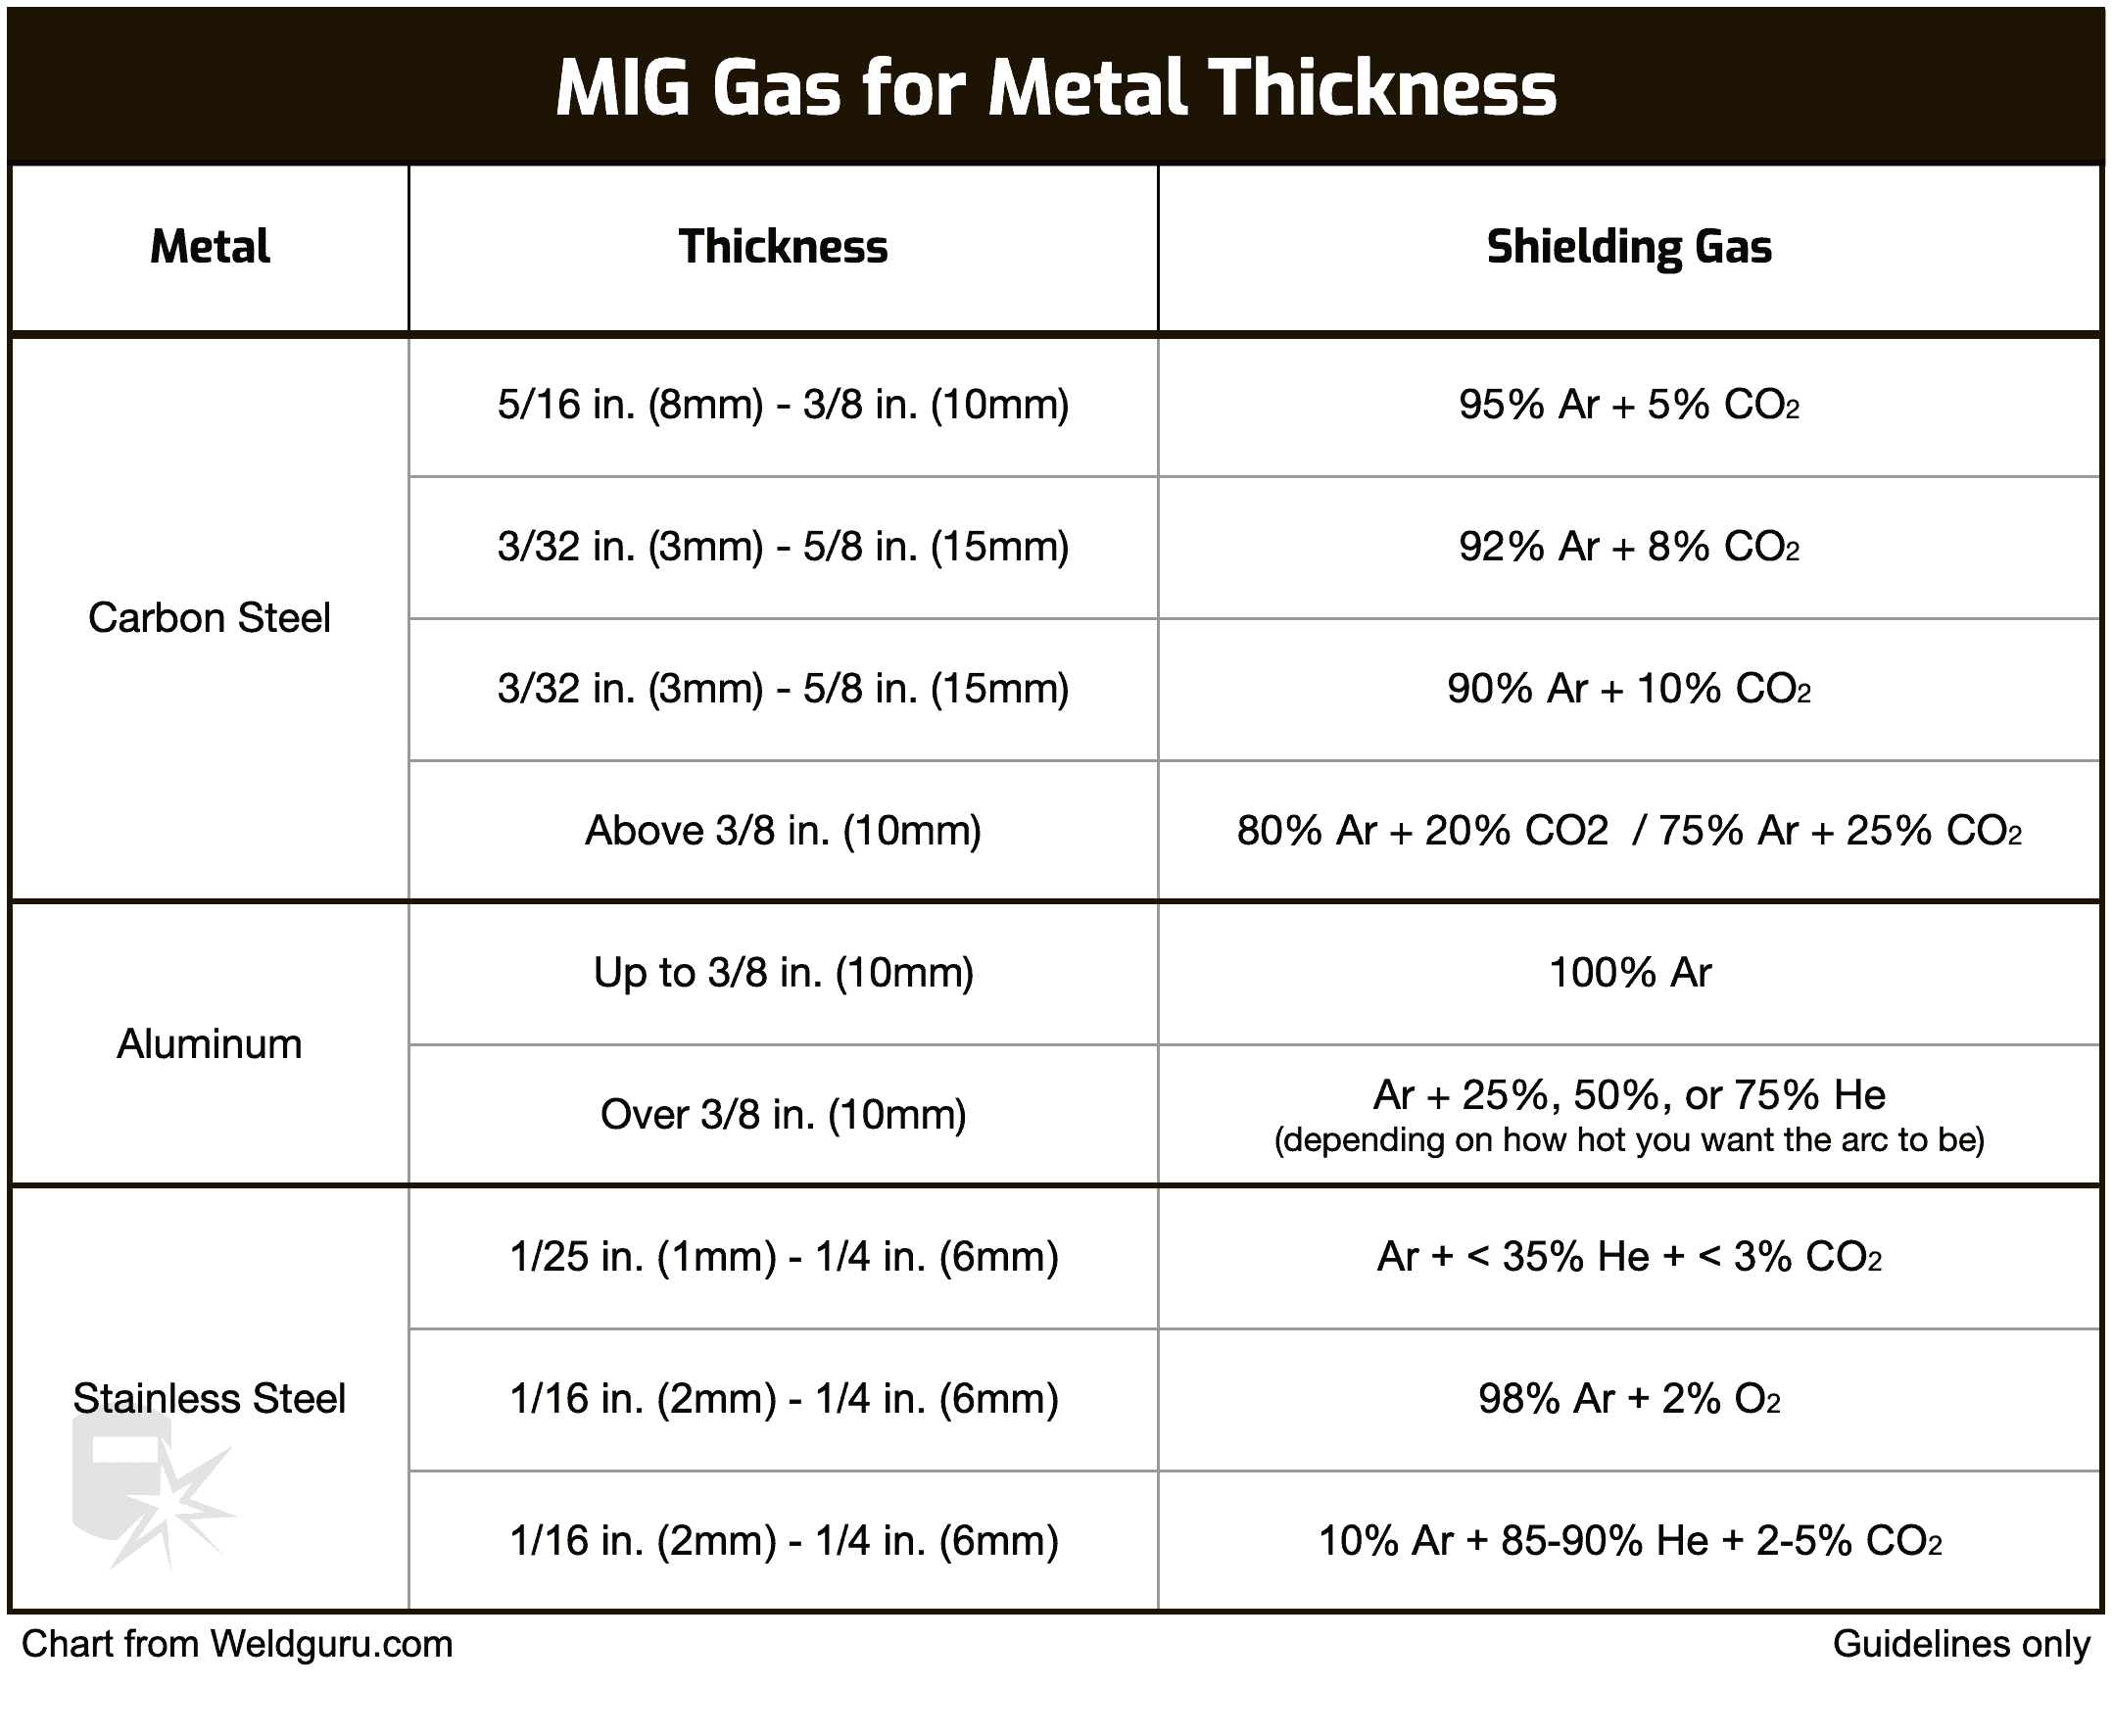 mig gas for metal thickness chart